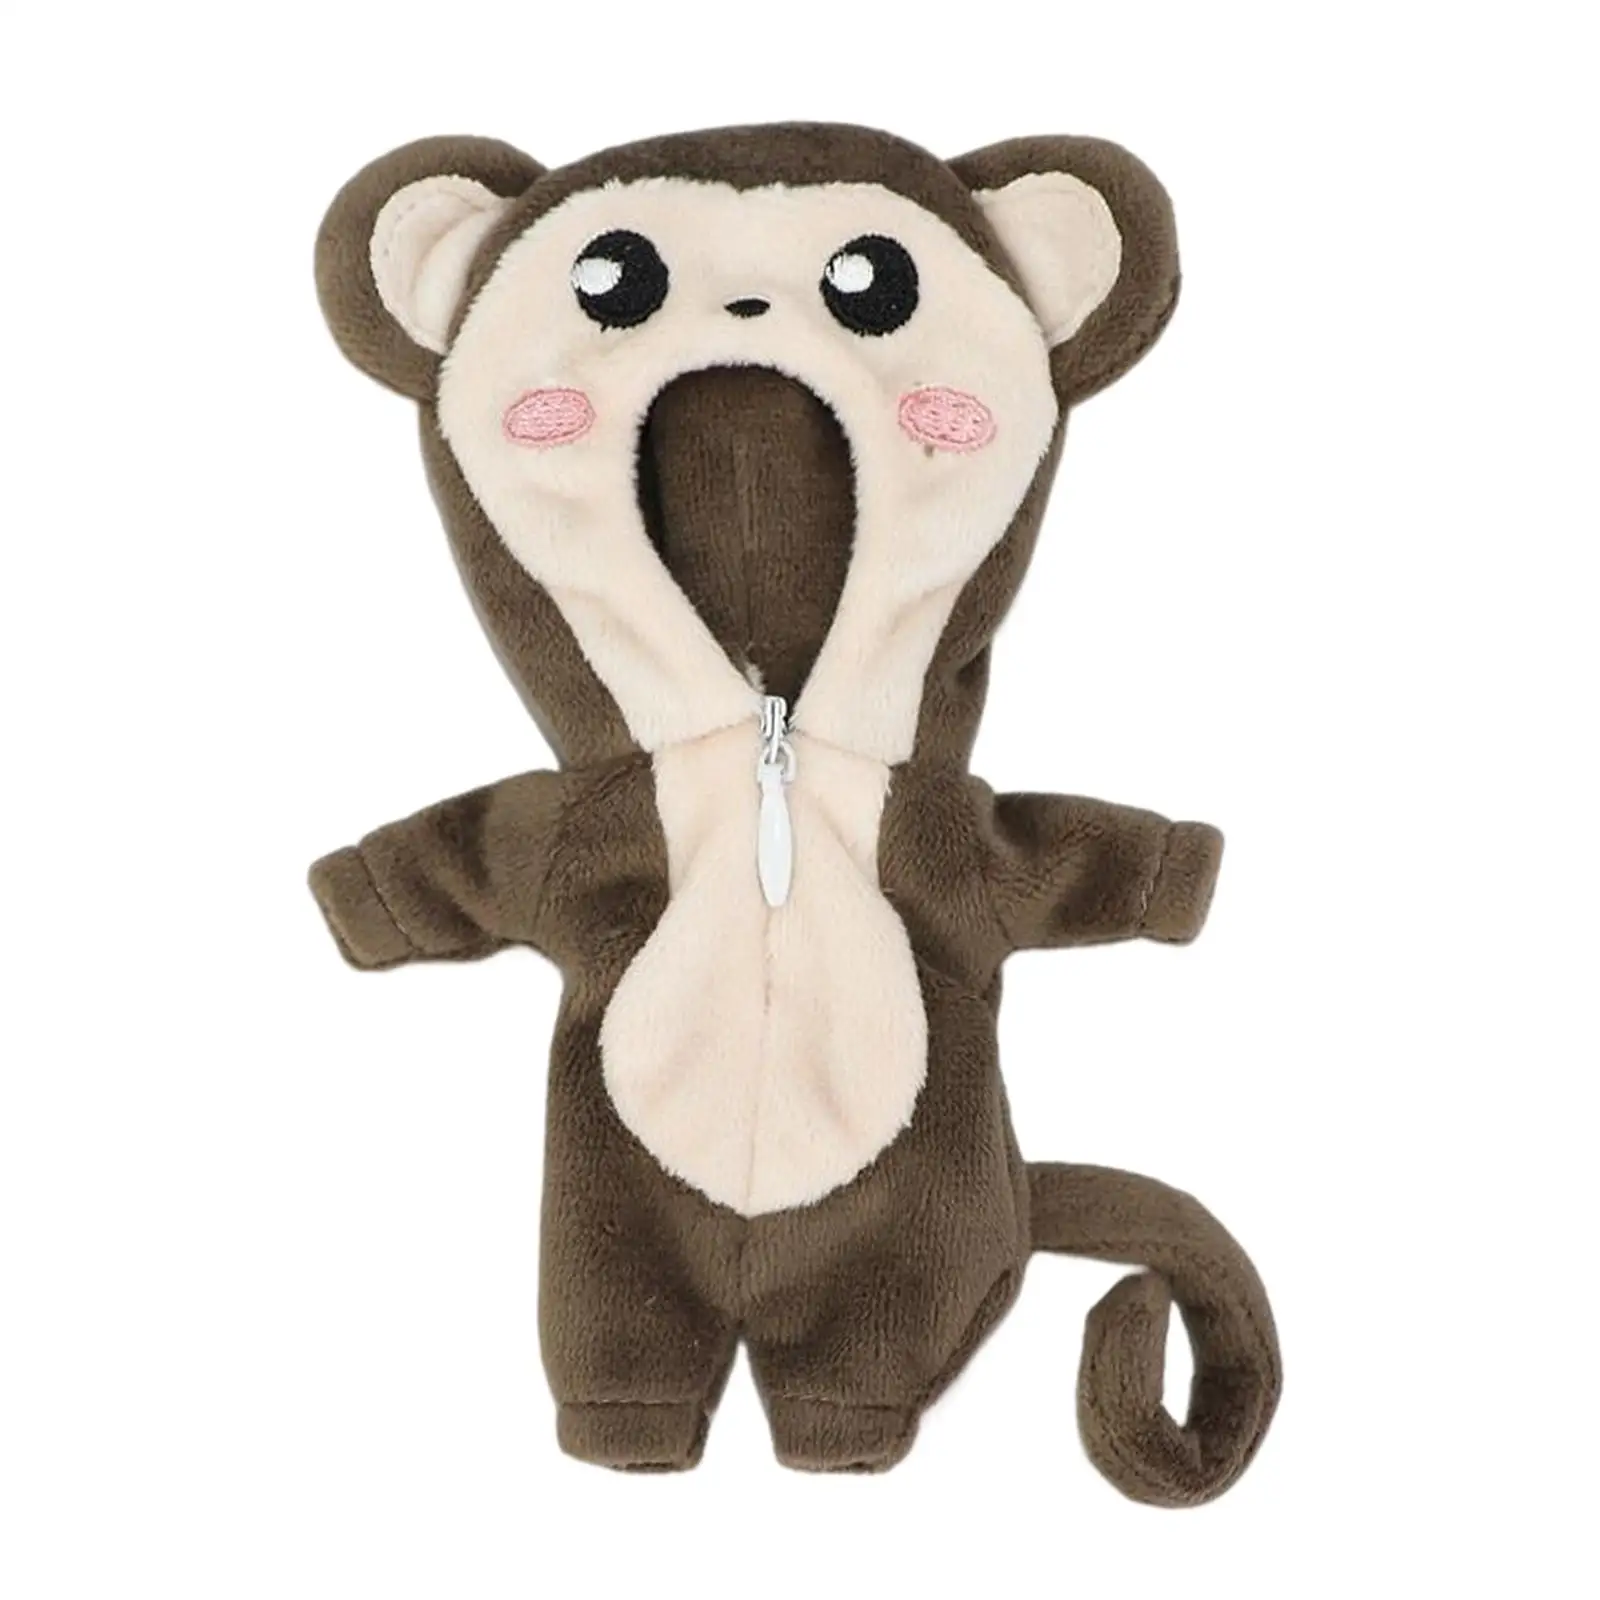 Cute Doll Clothes 1:12 Doll Clothes Animal Shaped with Zipper Gift DIY Plush Clothing Doll Accessories for Ob11 for Gsc Boys